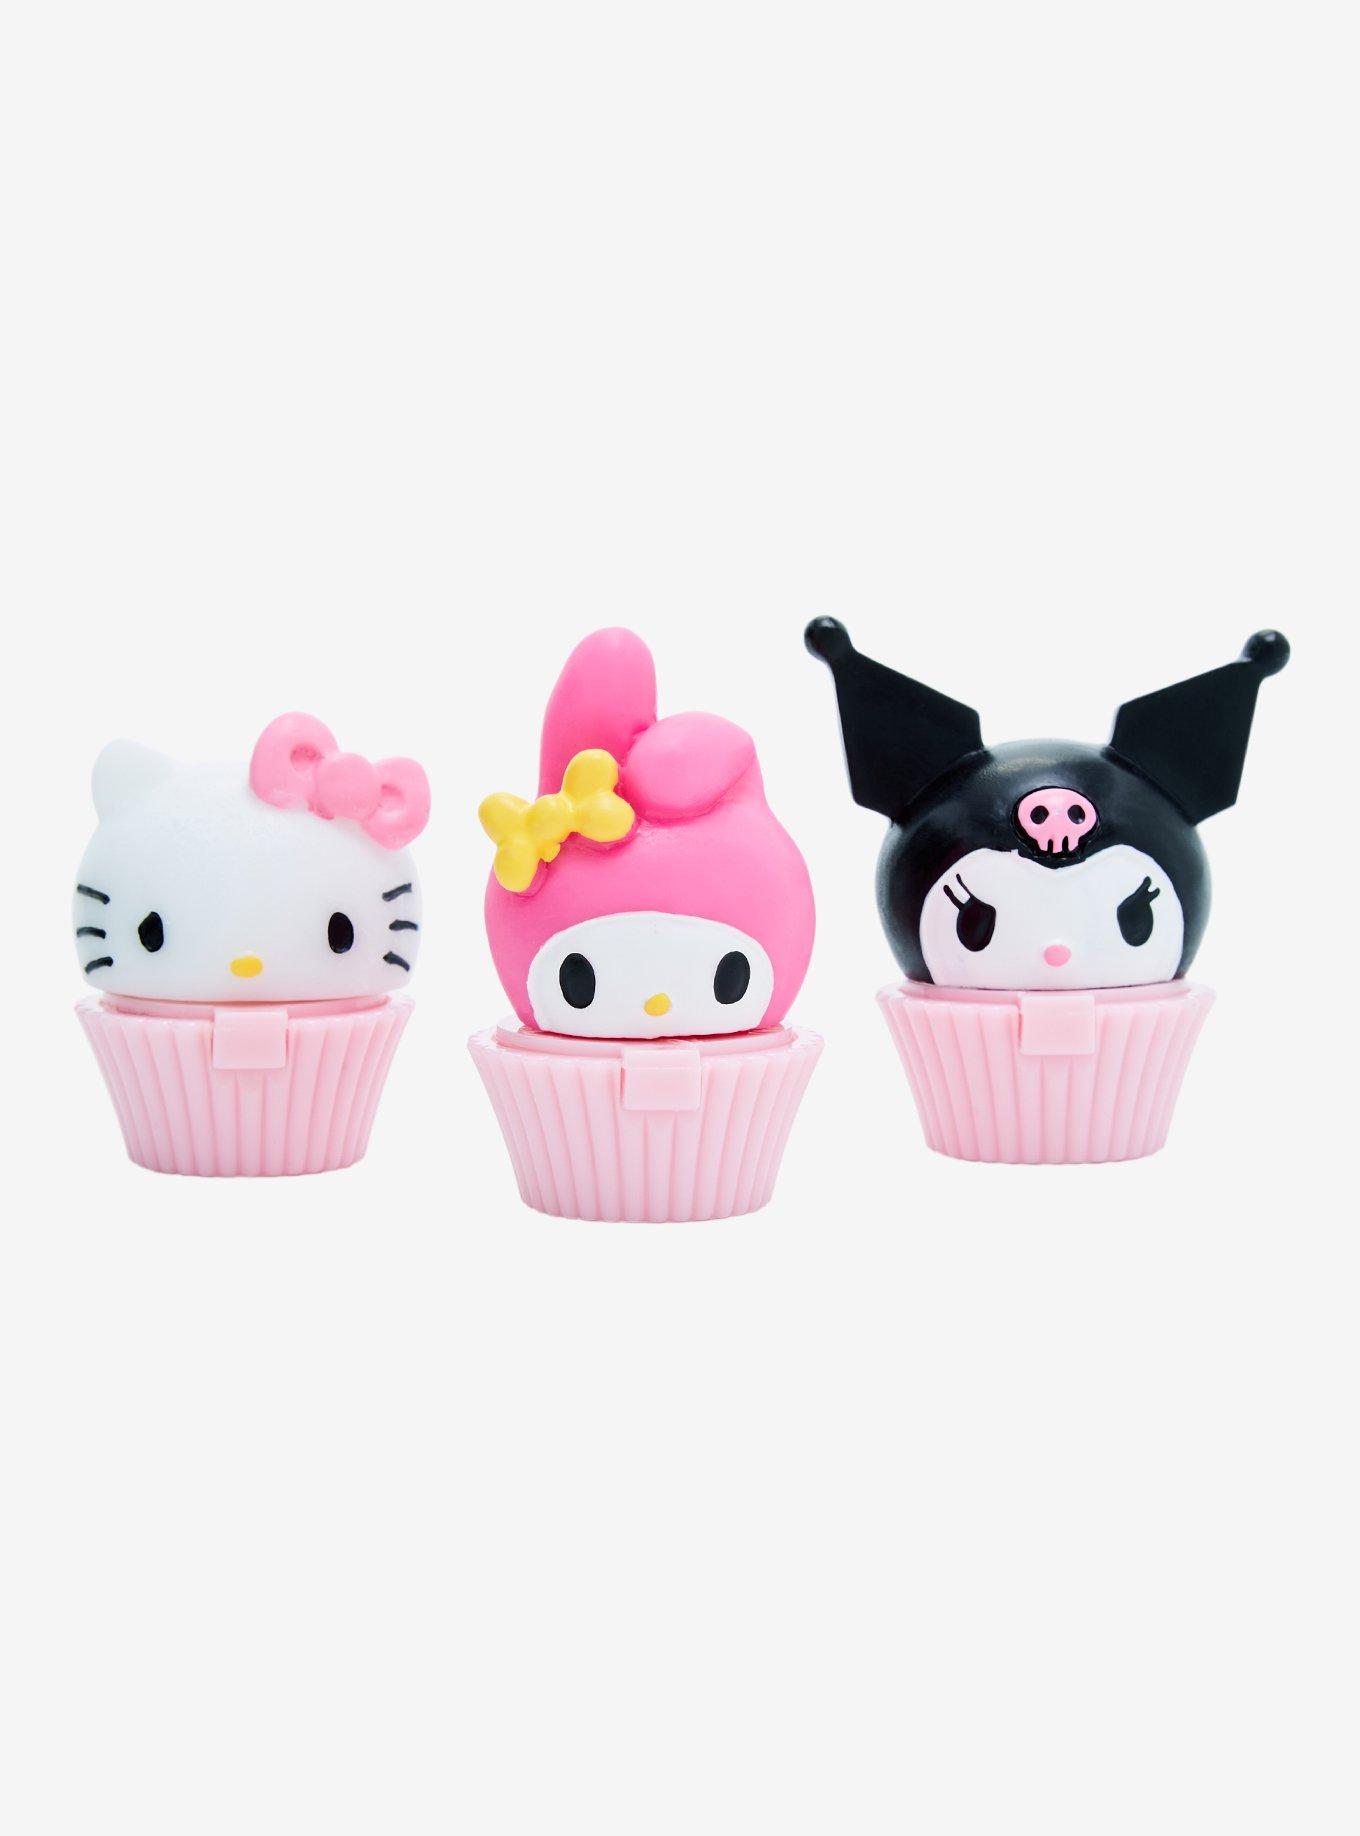 Hello Kitty Cupcake Candle | A Whimsical Blend of Strawberry & Vanilla  Scent | A Sweet Treat for Your Senses | Birthday Gift | Soy Wax